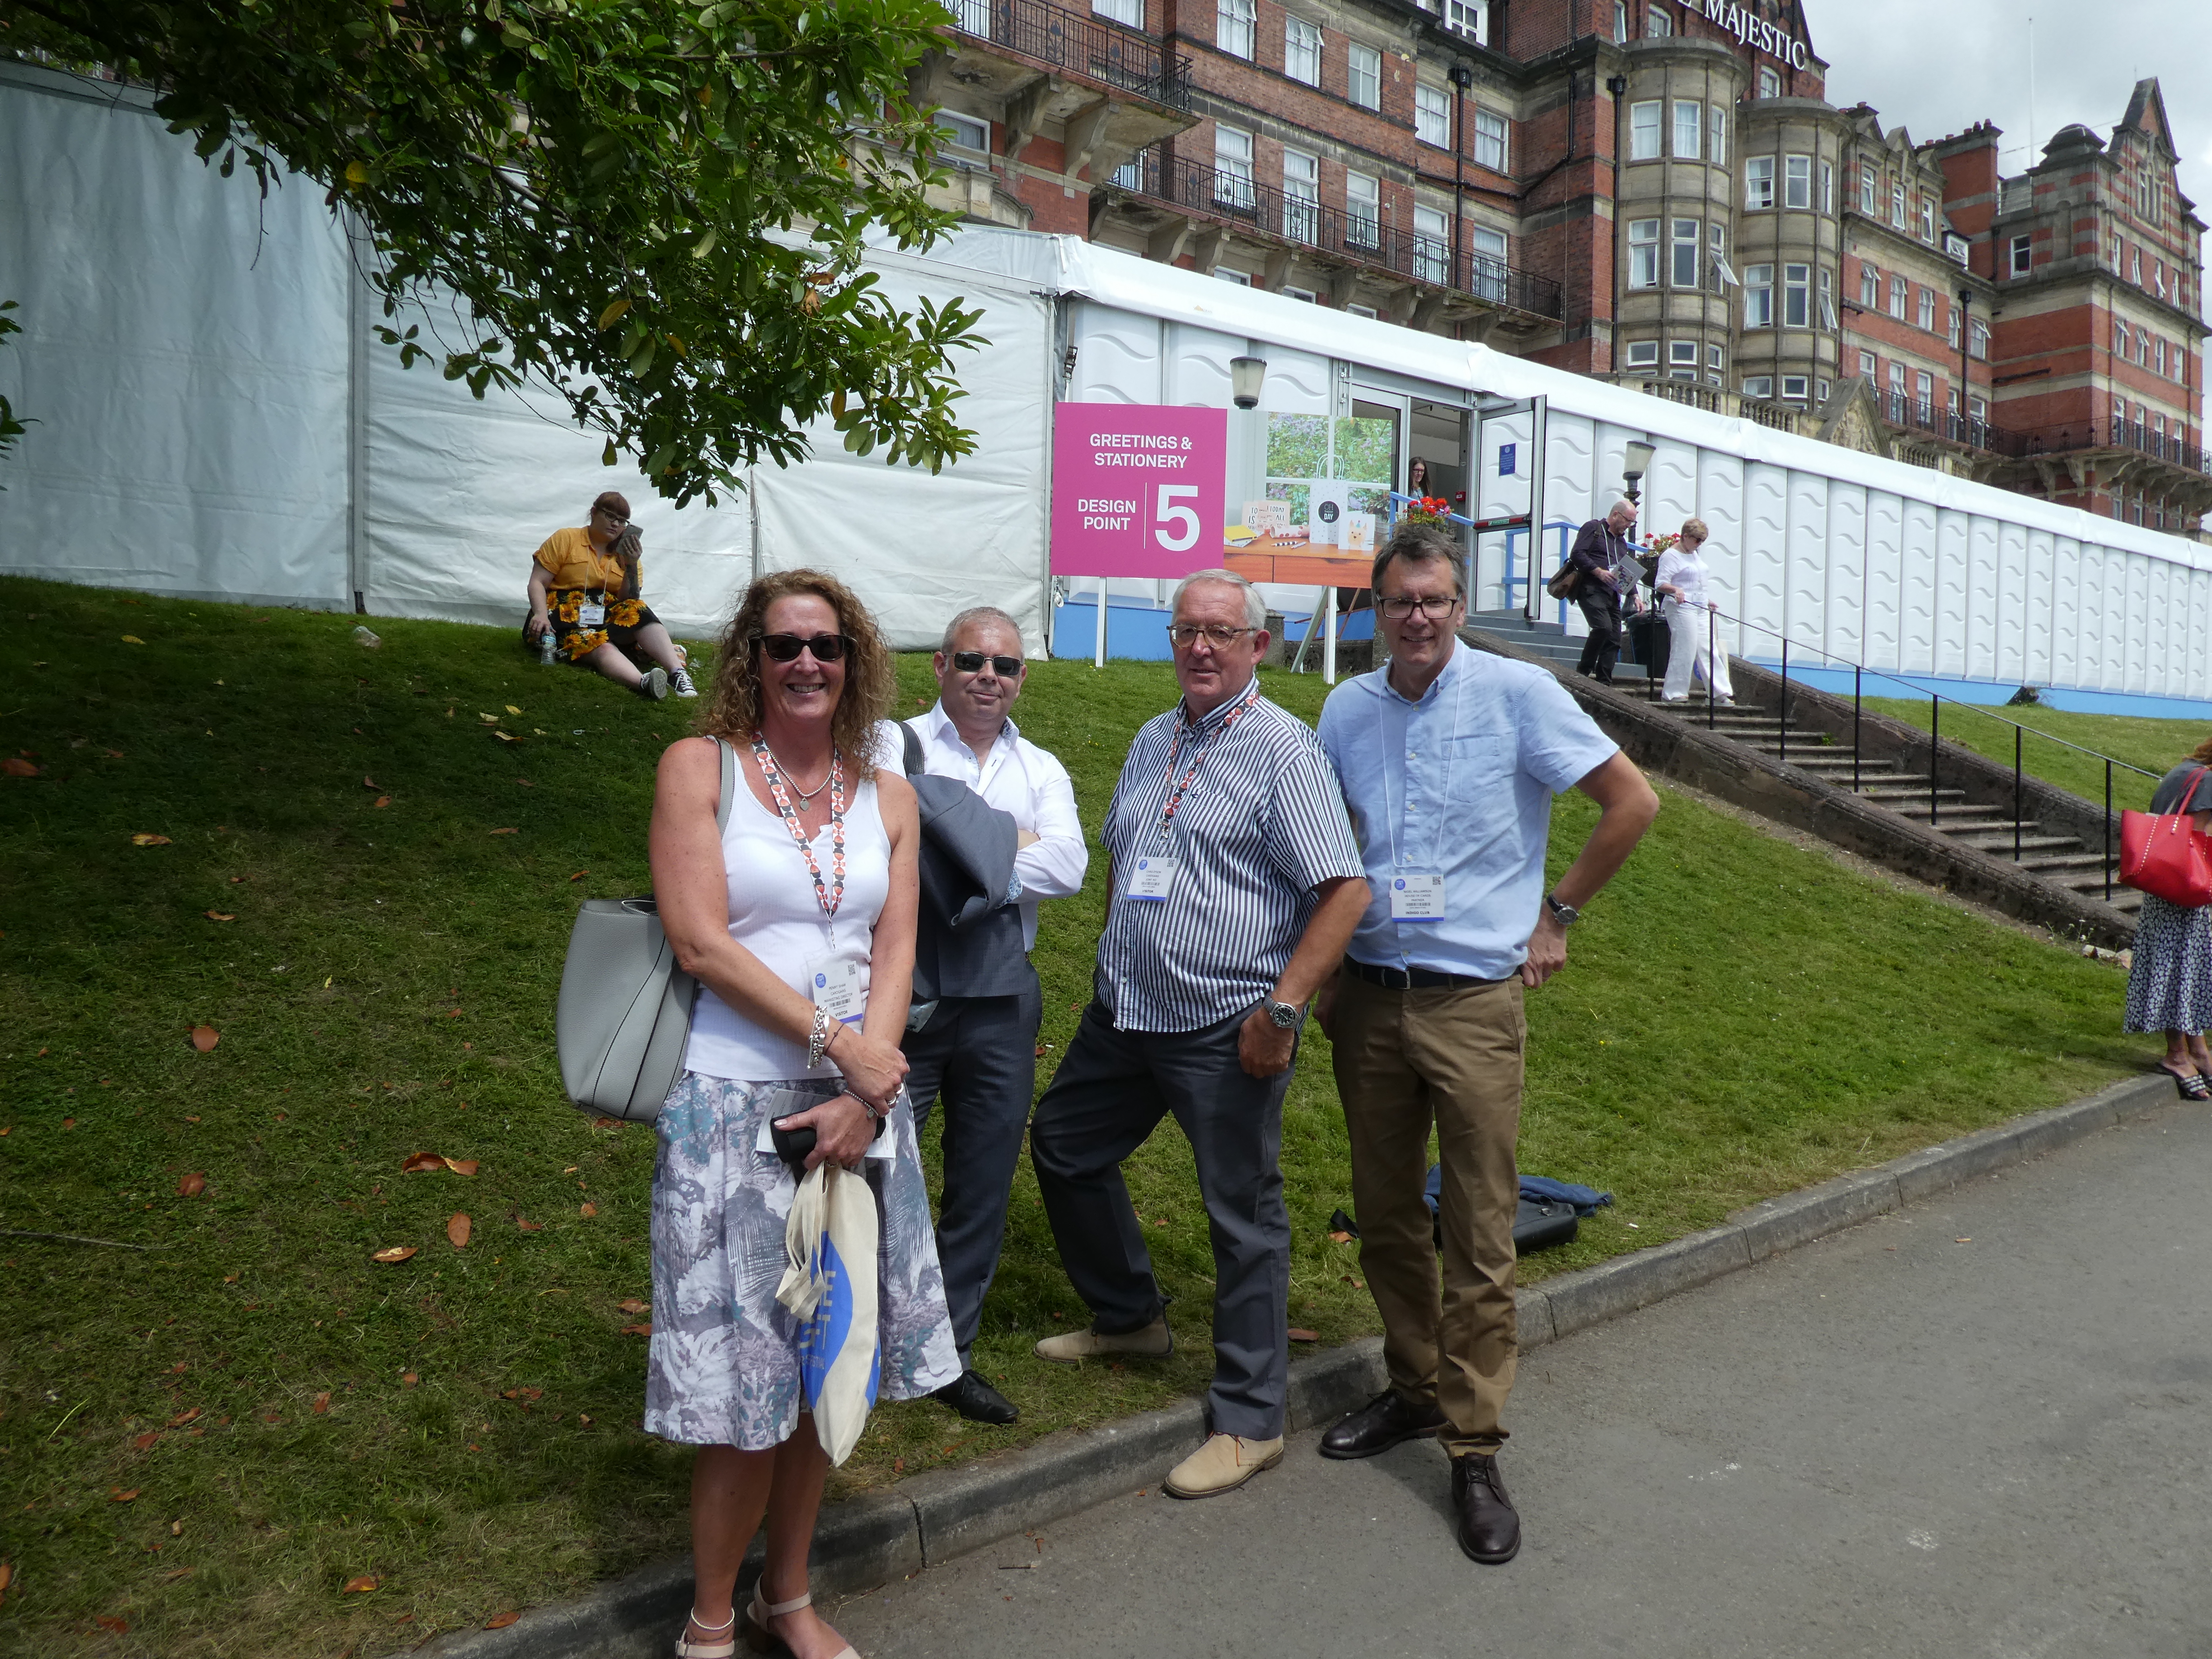 Above: Cardgains’ Penny Shaw and Chris Dyson (second left) with House of Cards’ Nigel Williamson (far right) and Miles Robinson next to the Greetings and Stationery marquee.